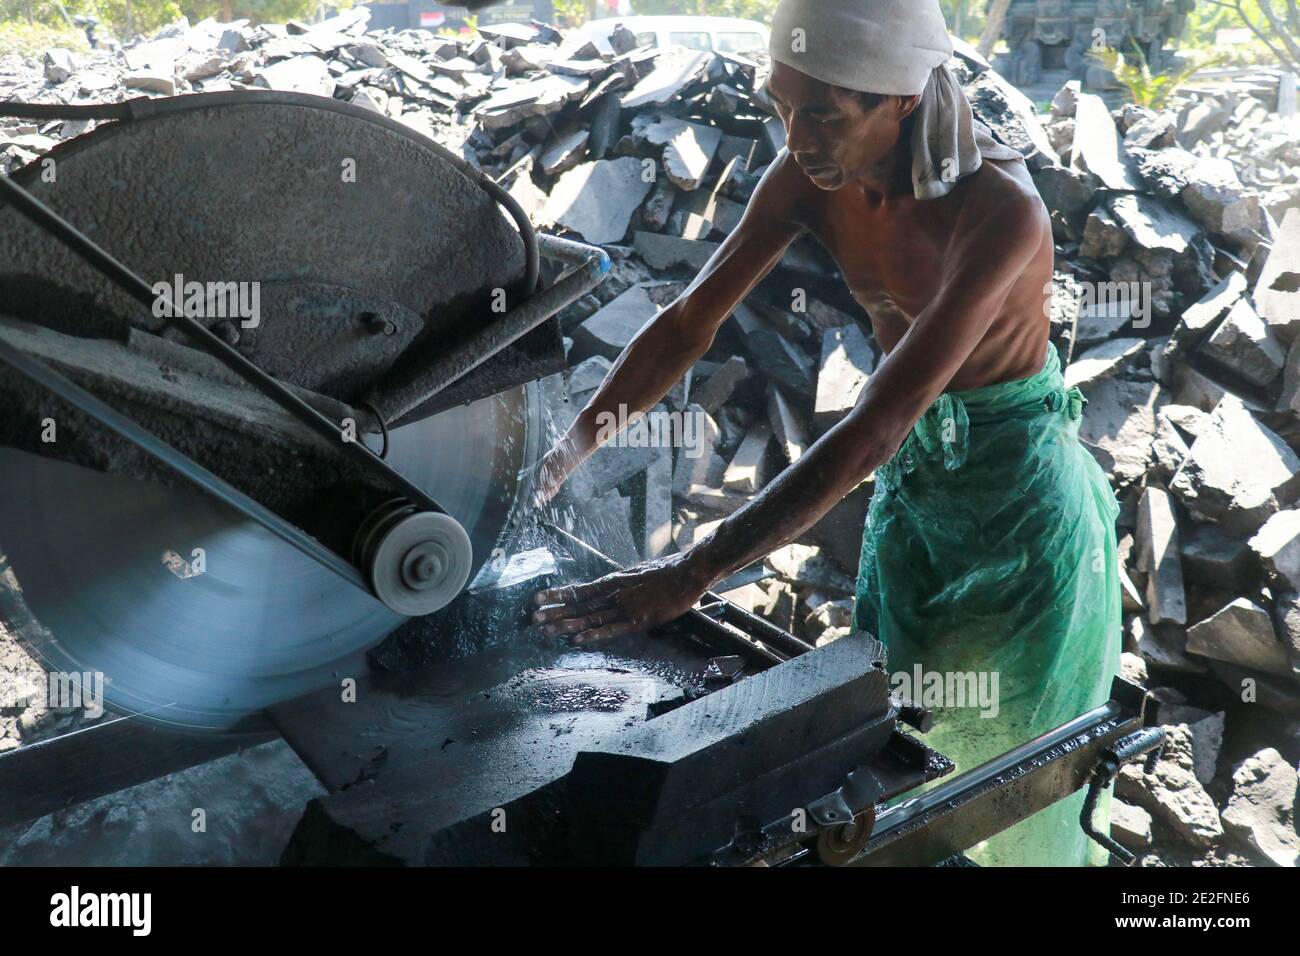 A man cuts a black volcanic stone with a water jet cutting machine, Bali, Indonesia Stock Photo